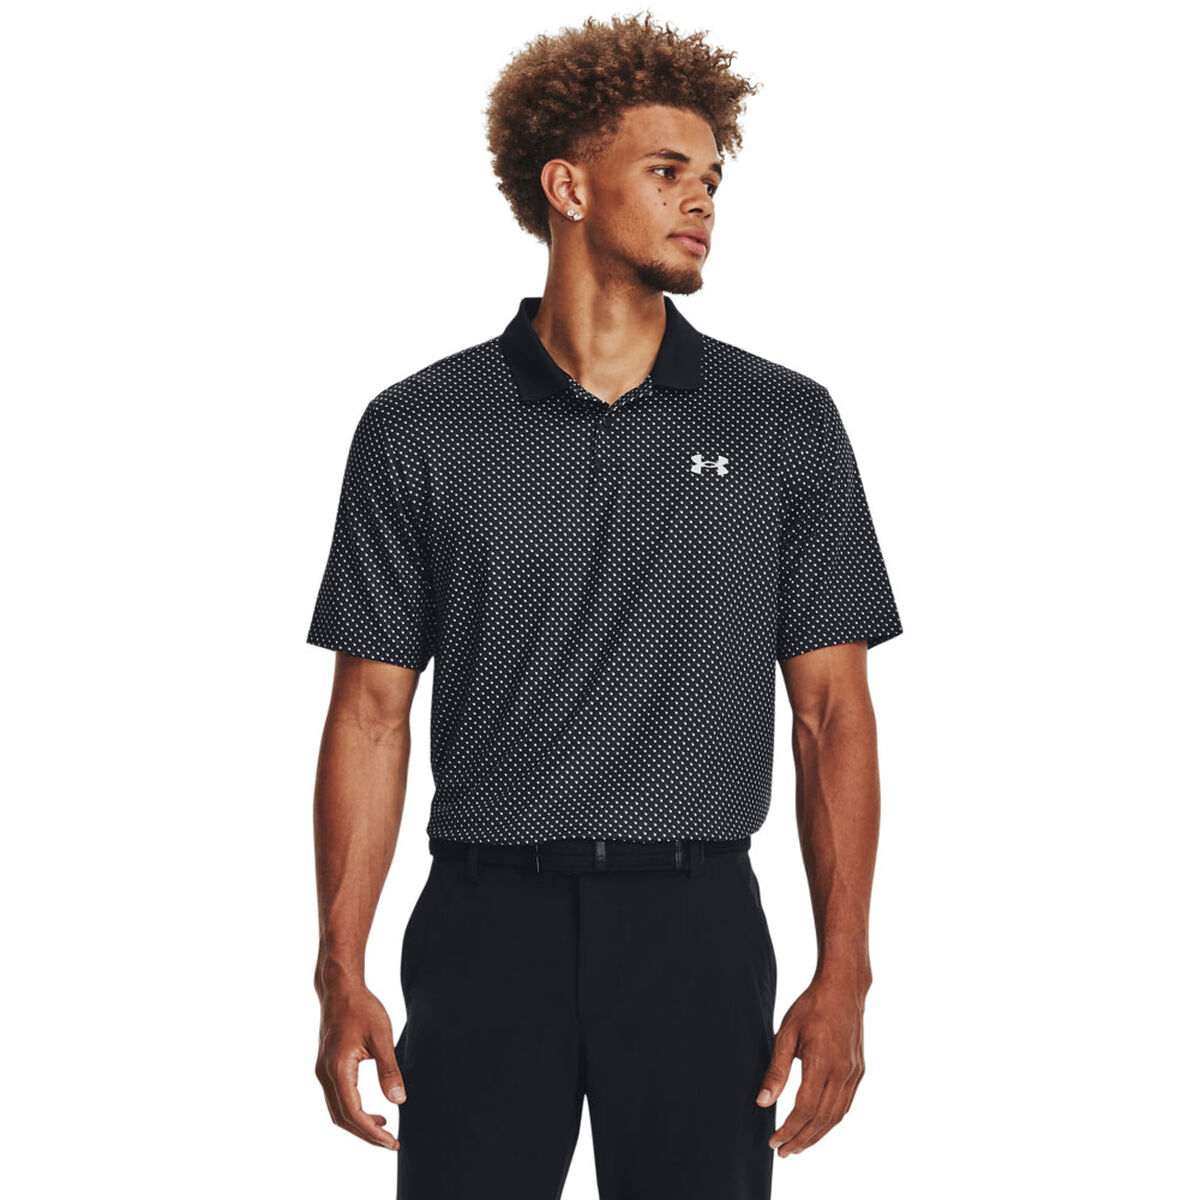 Under Armour Men's Performance 3.0 Printed Golf Polo Shirt, Mens, Black/halo gray, Small | American Golf von Under Armour